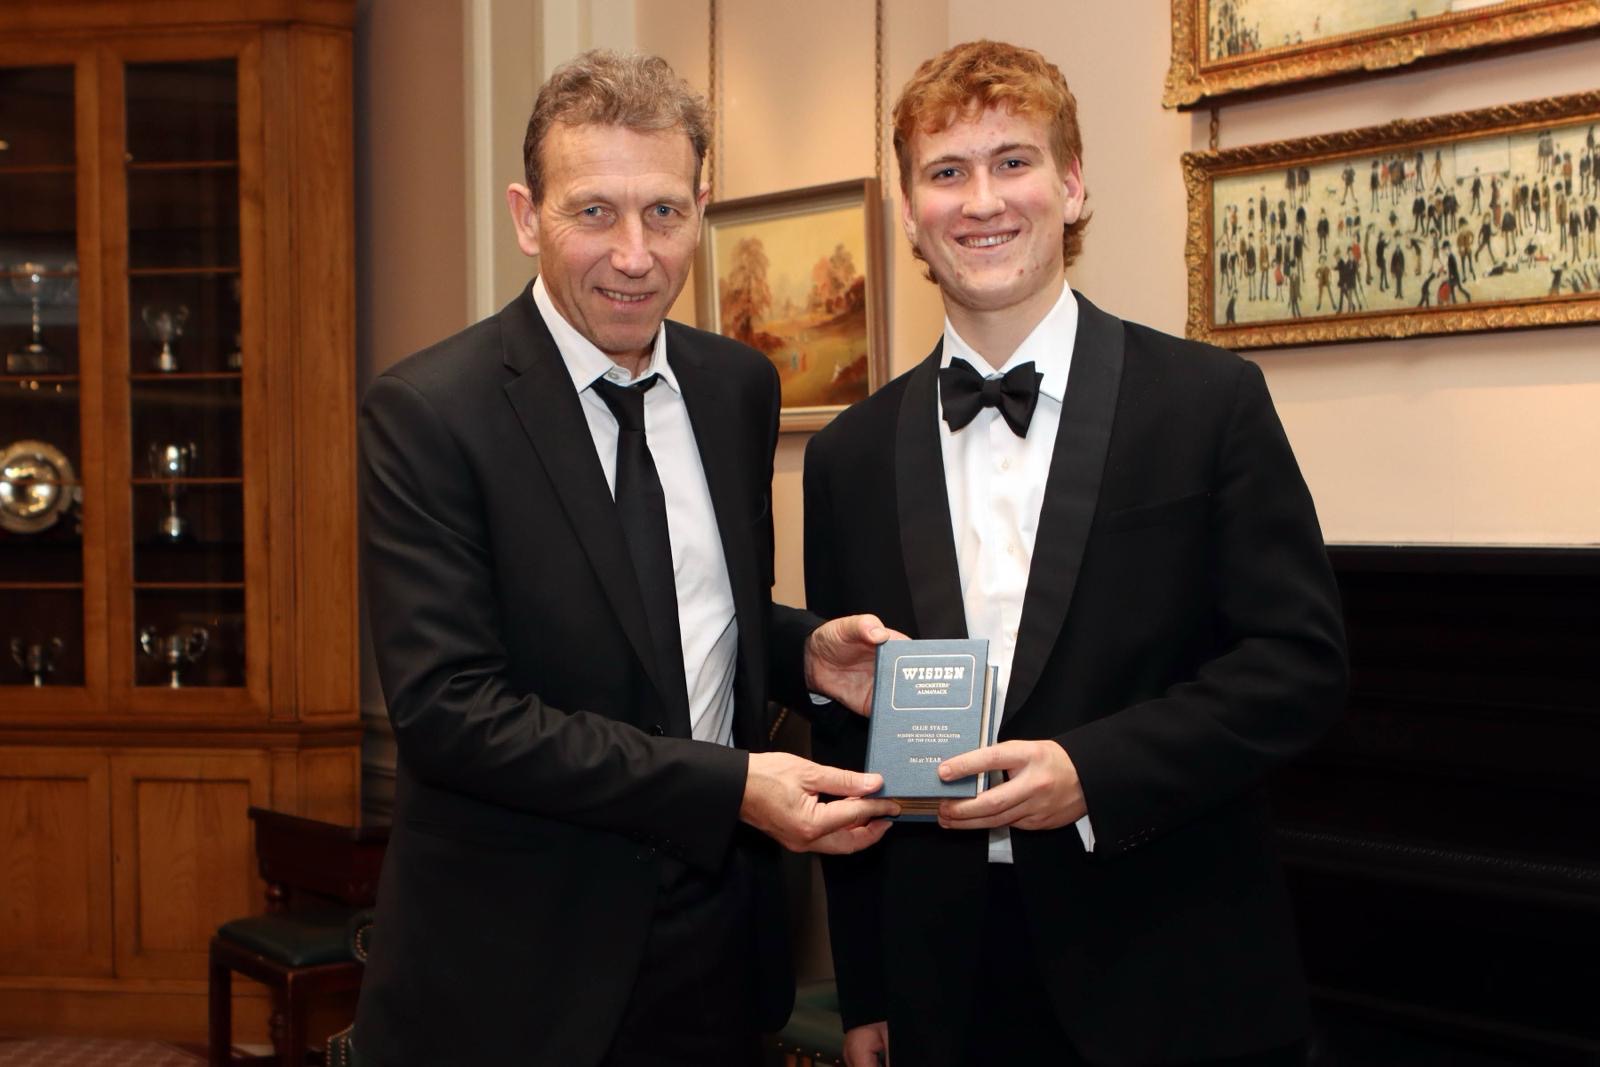 Ollie Sykes named Wisden Schools Cricketer of the Year